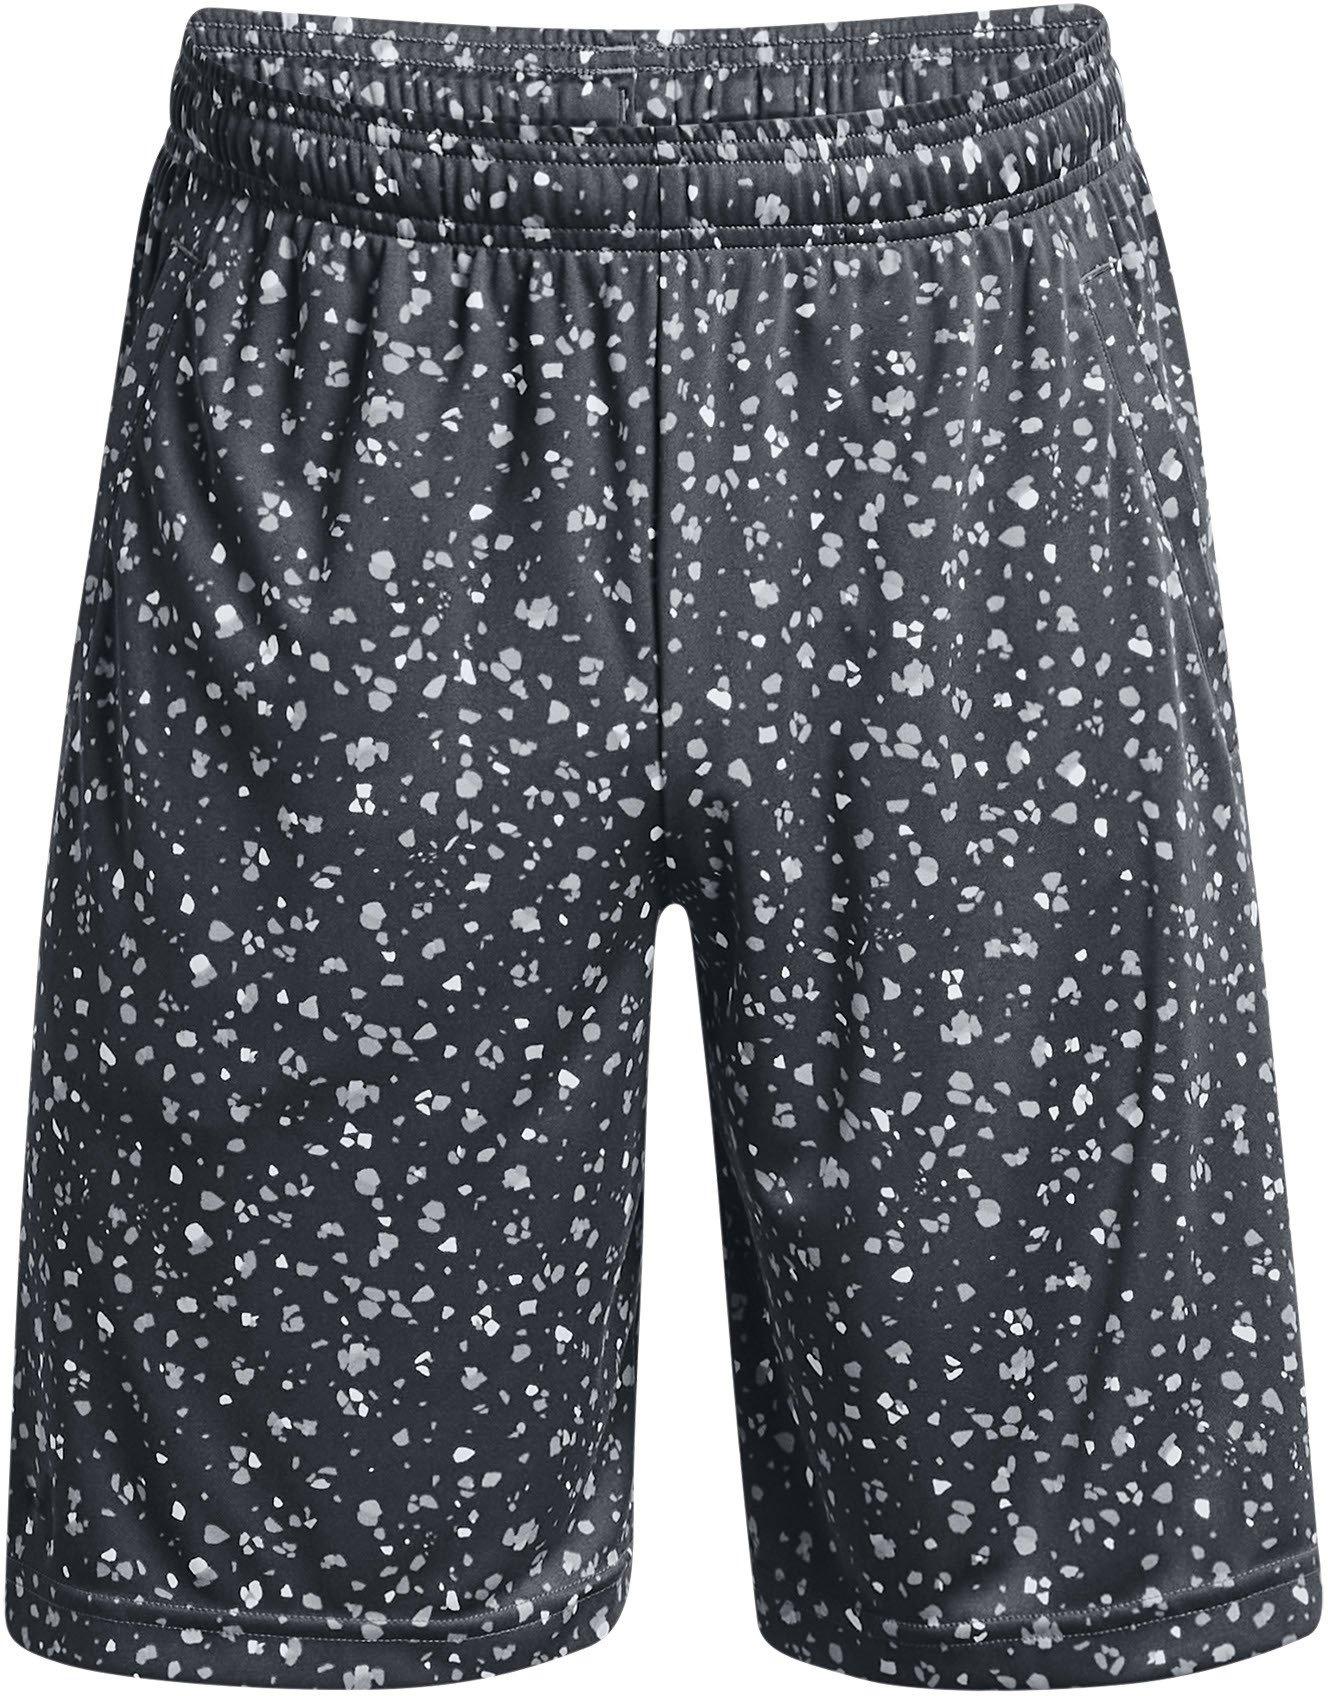 Under Armour Tech Printed Shorts-GRY S